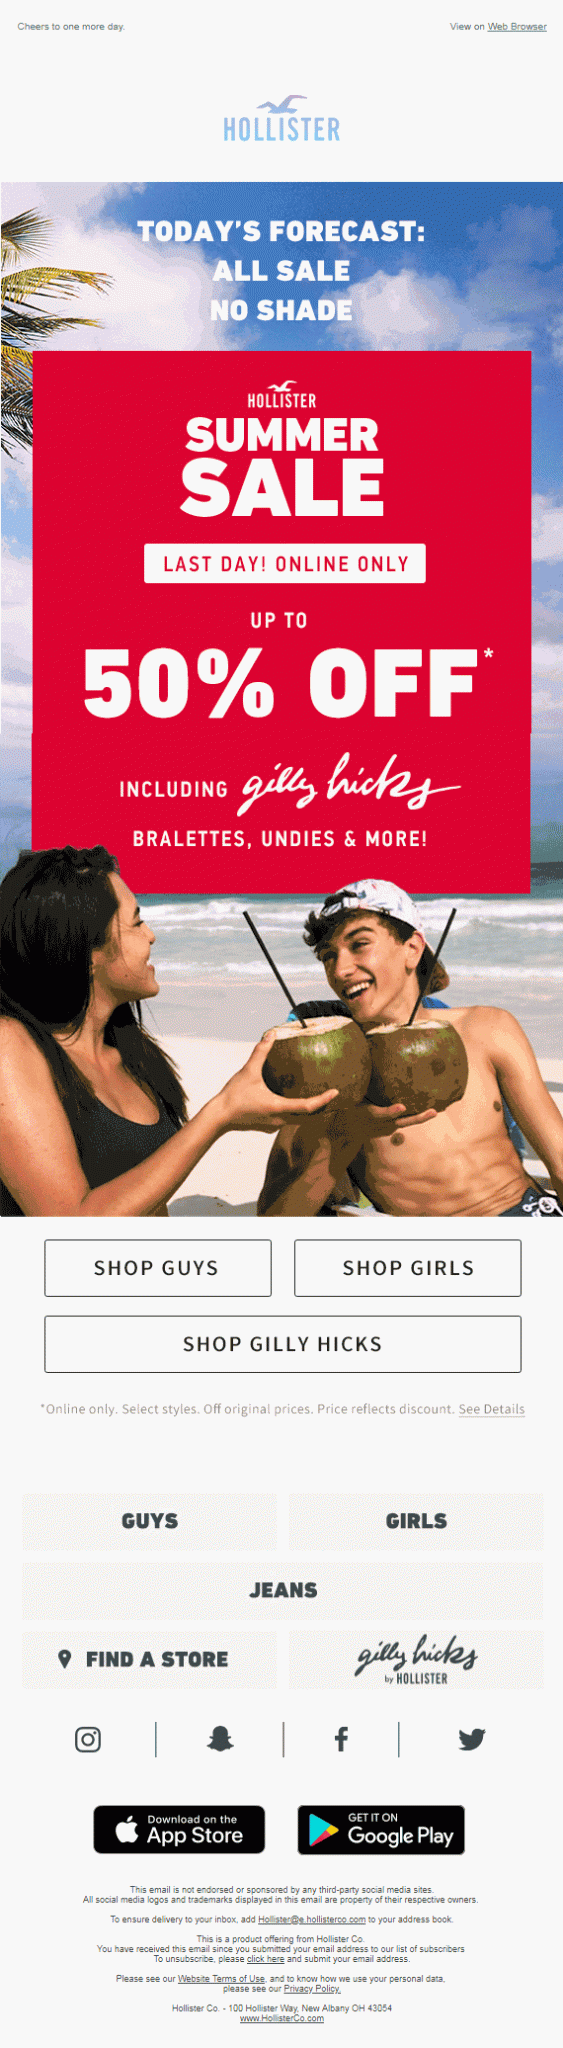 Hollister email ad